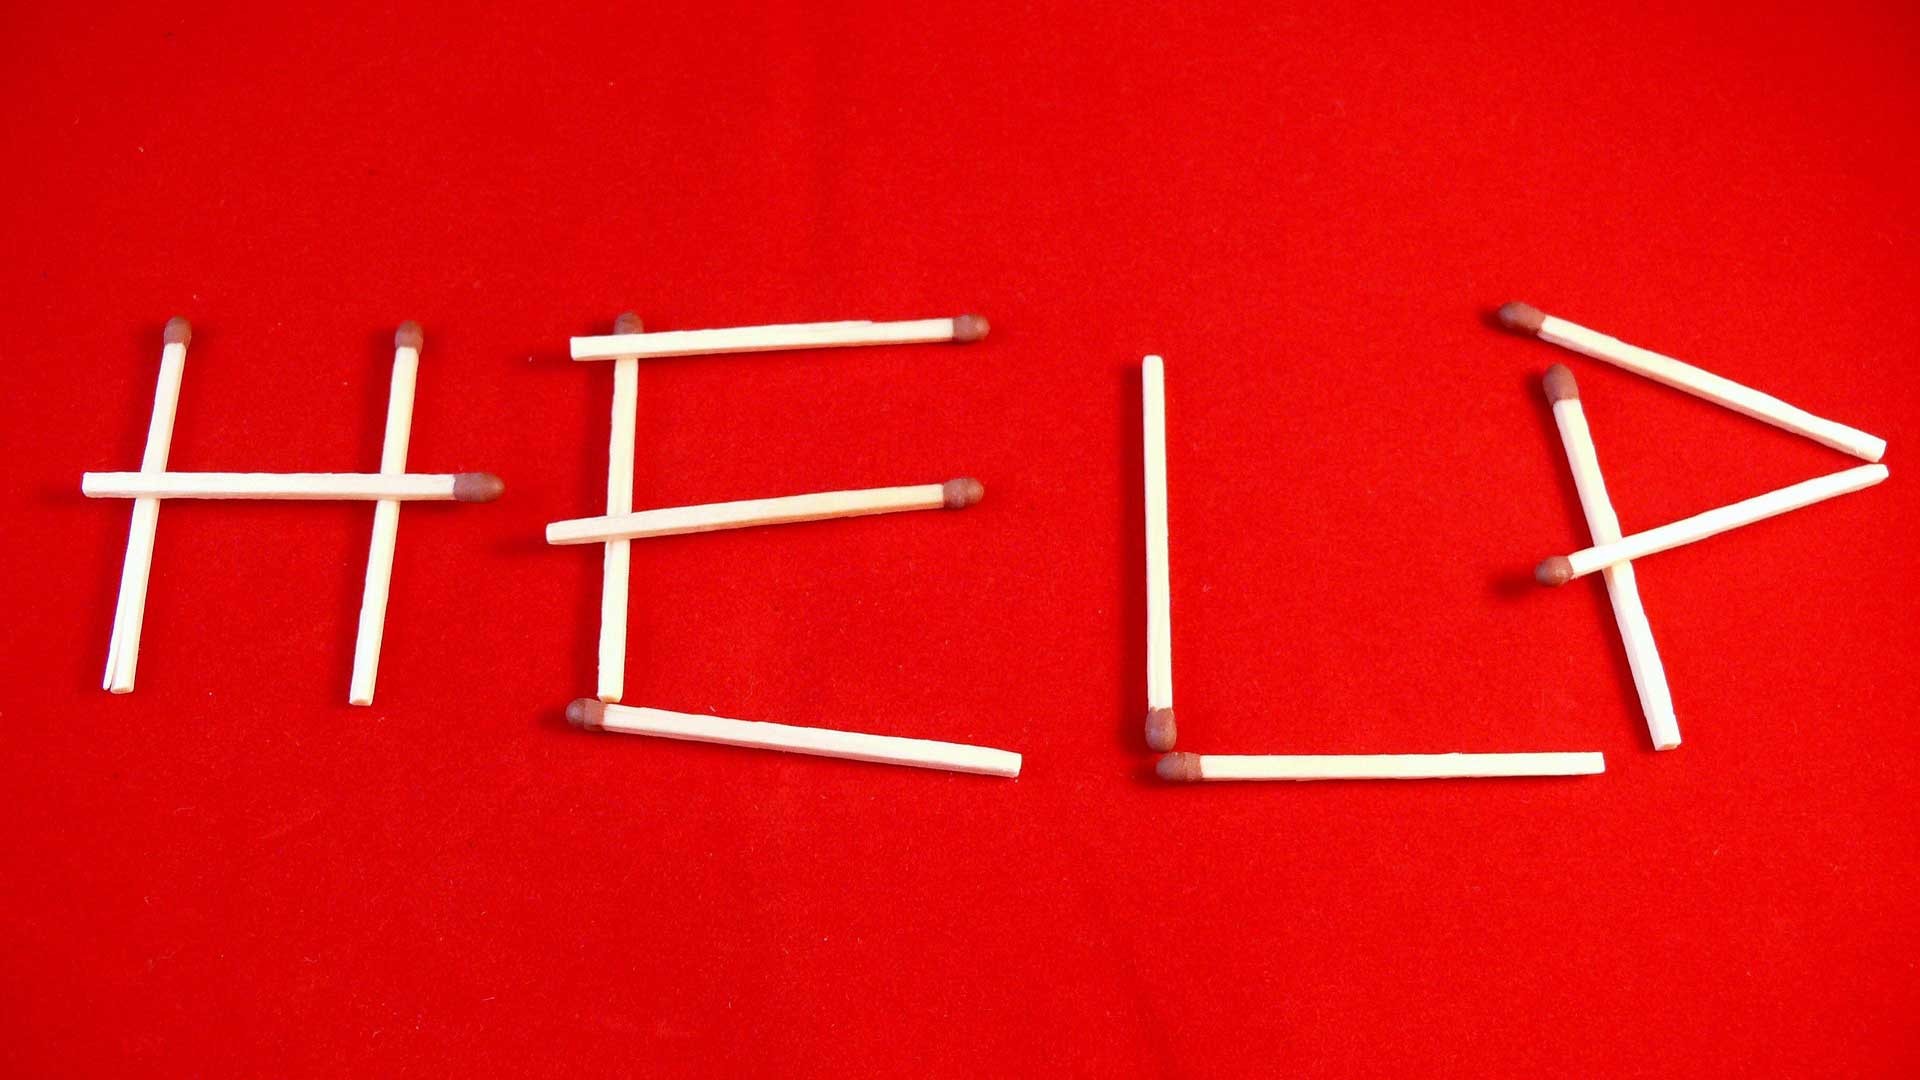 Word help written with matchsticks on a red background